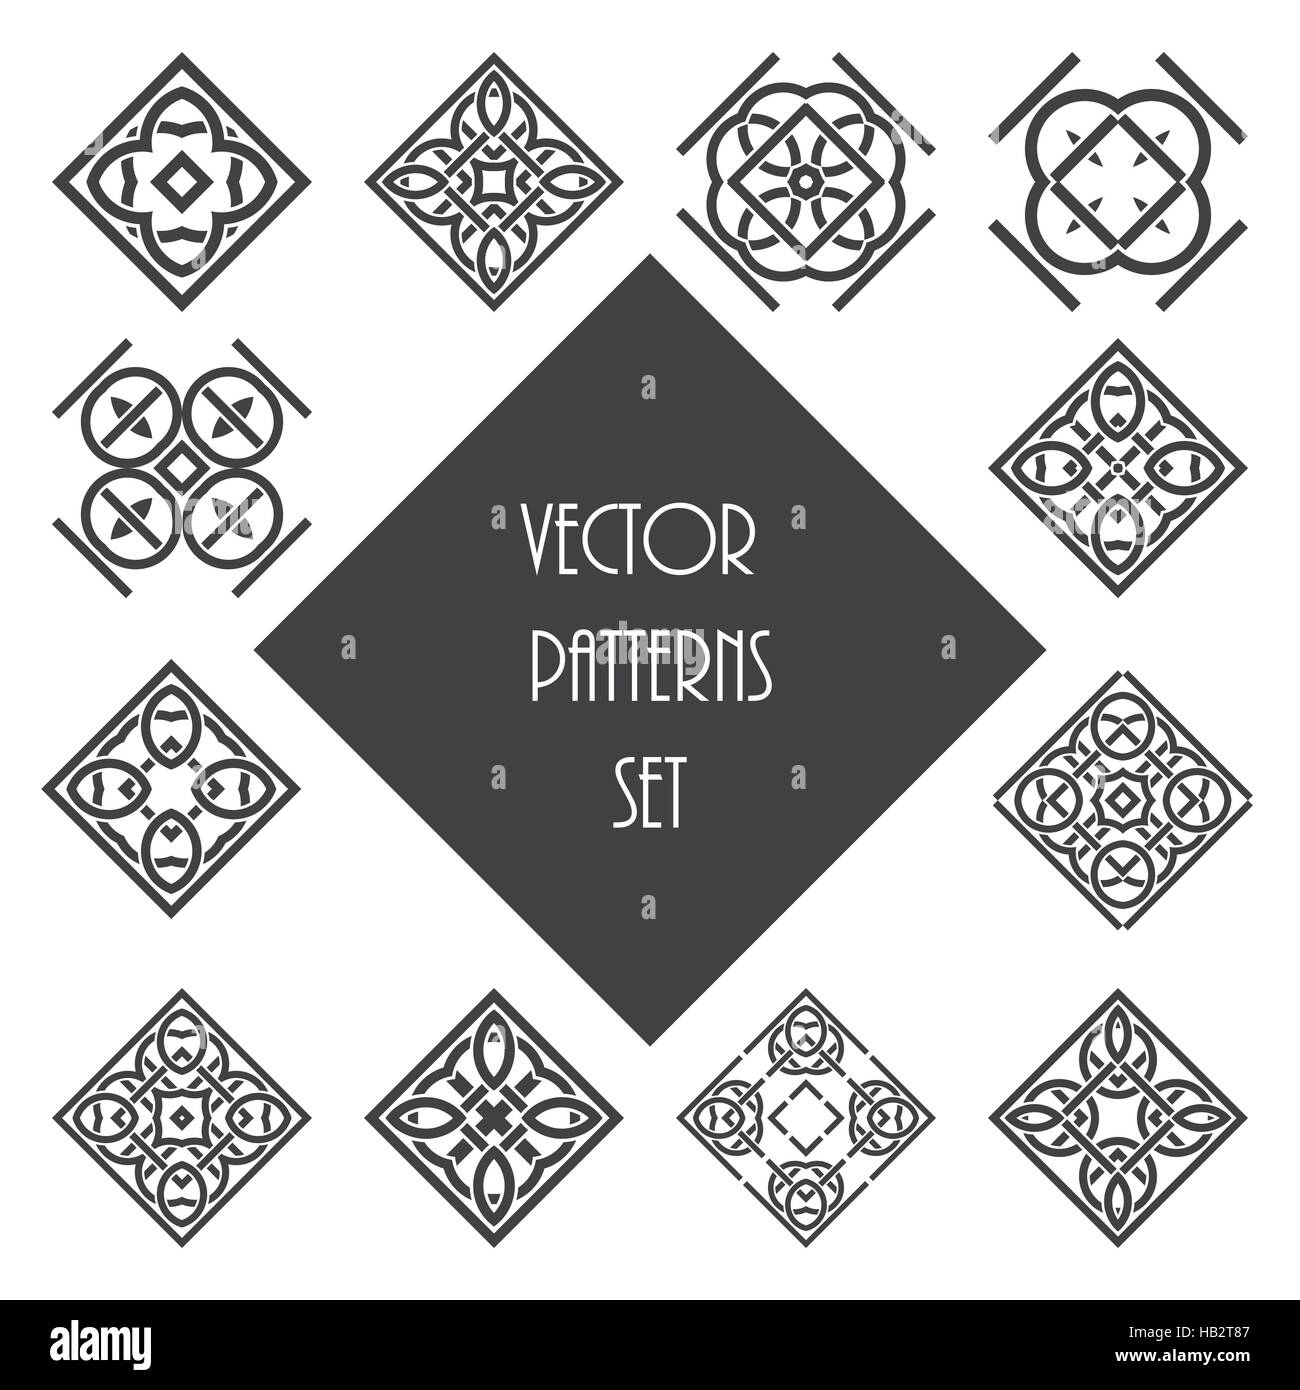 Knot ornament design set. Abstract vector pattern elements. Stock Vector